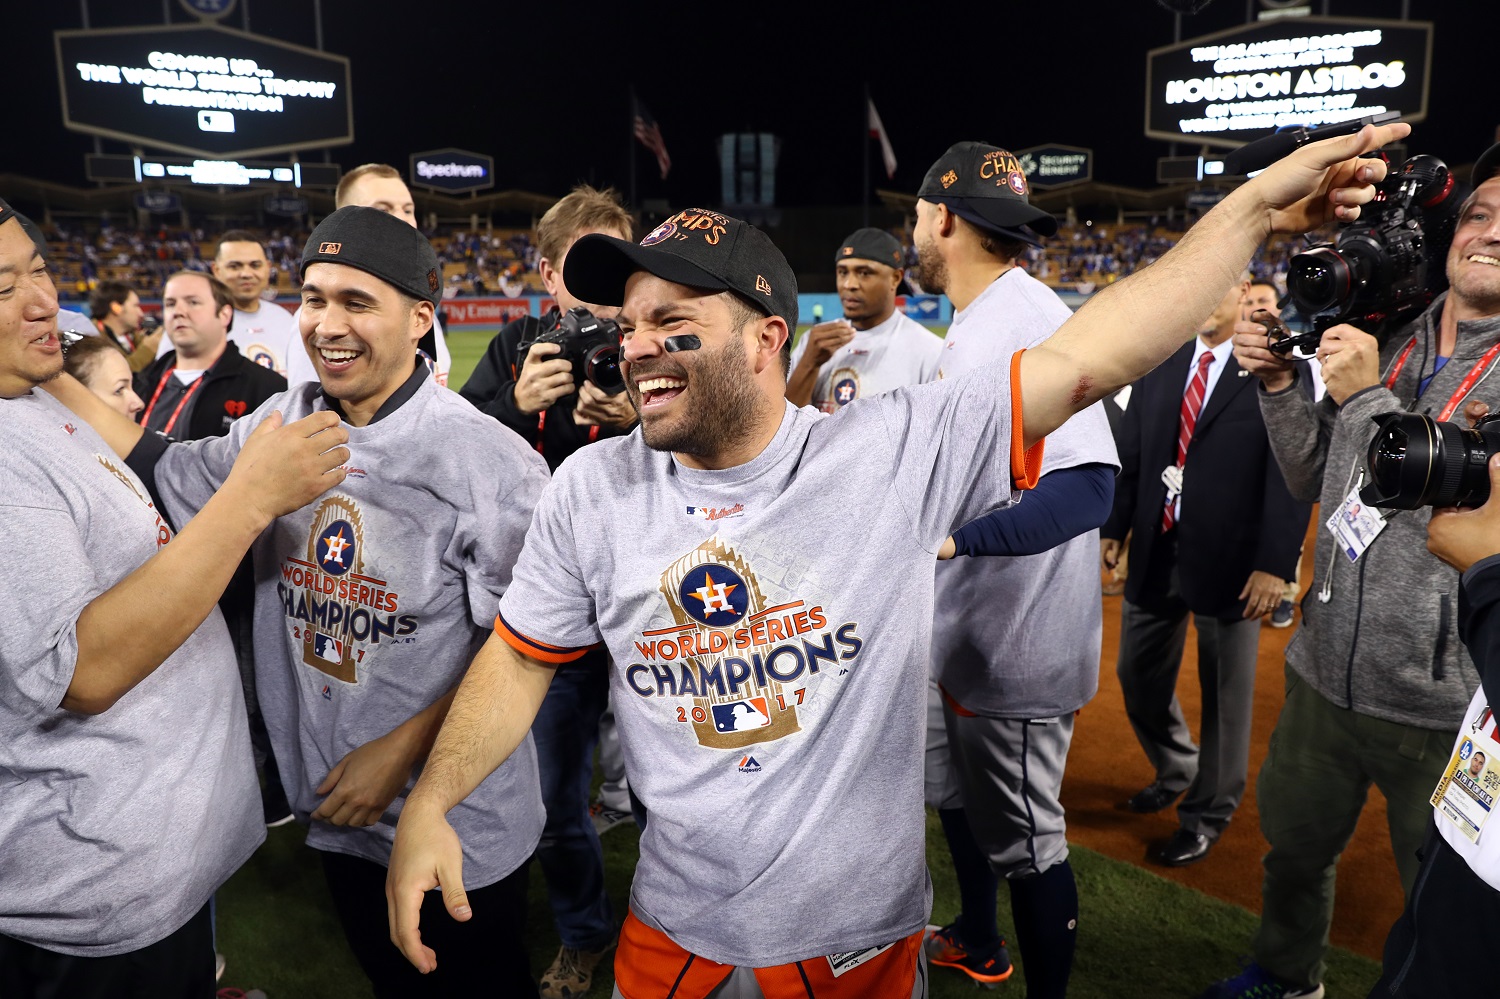 Jose Altuve celebrates after the Houston Astros defeated the Los Angeles Dodgers in Game 7 of the 2017 World Series at Dodger Stadium.